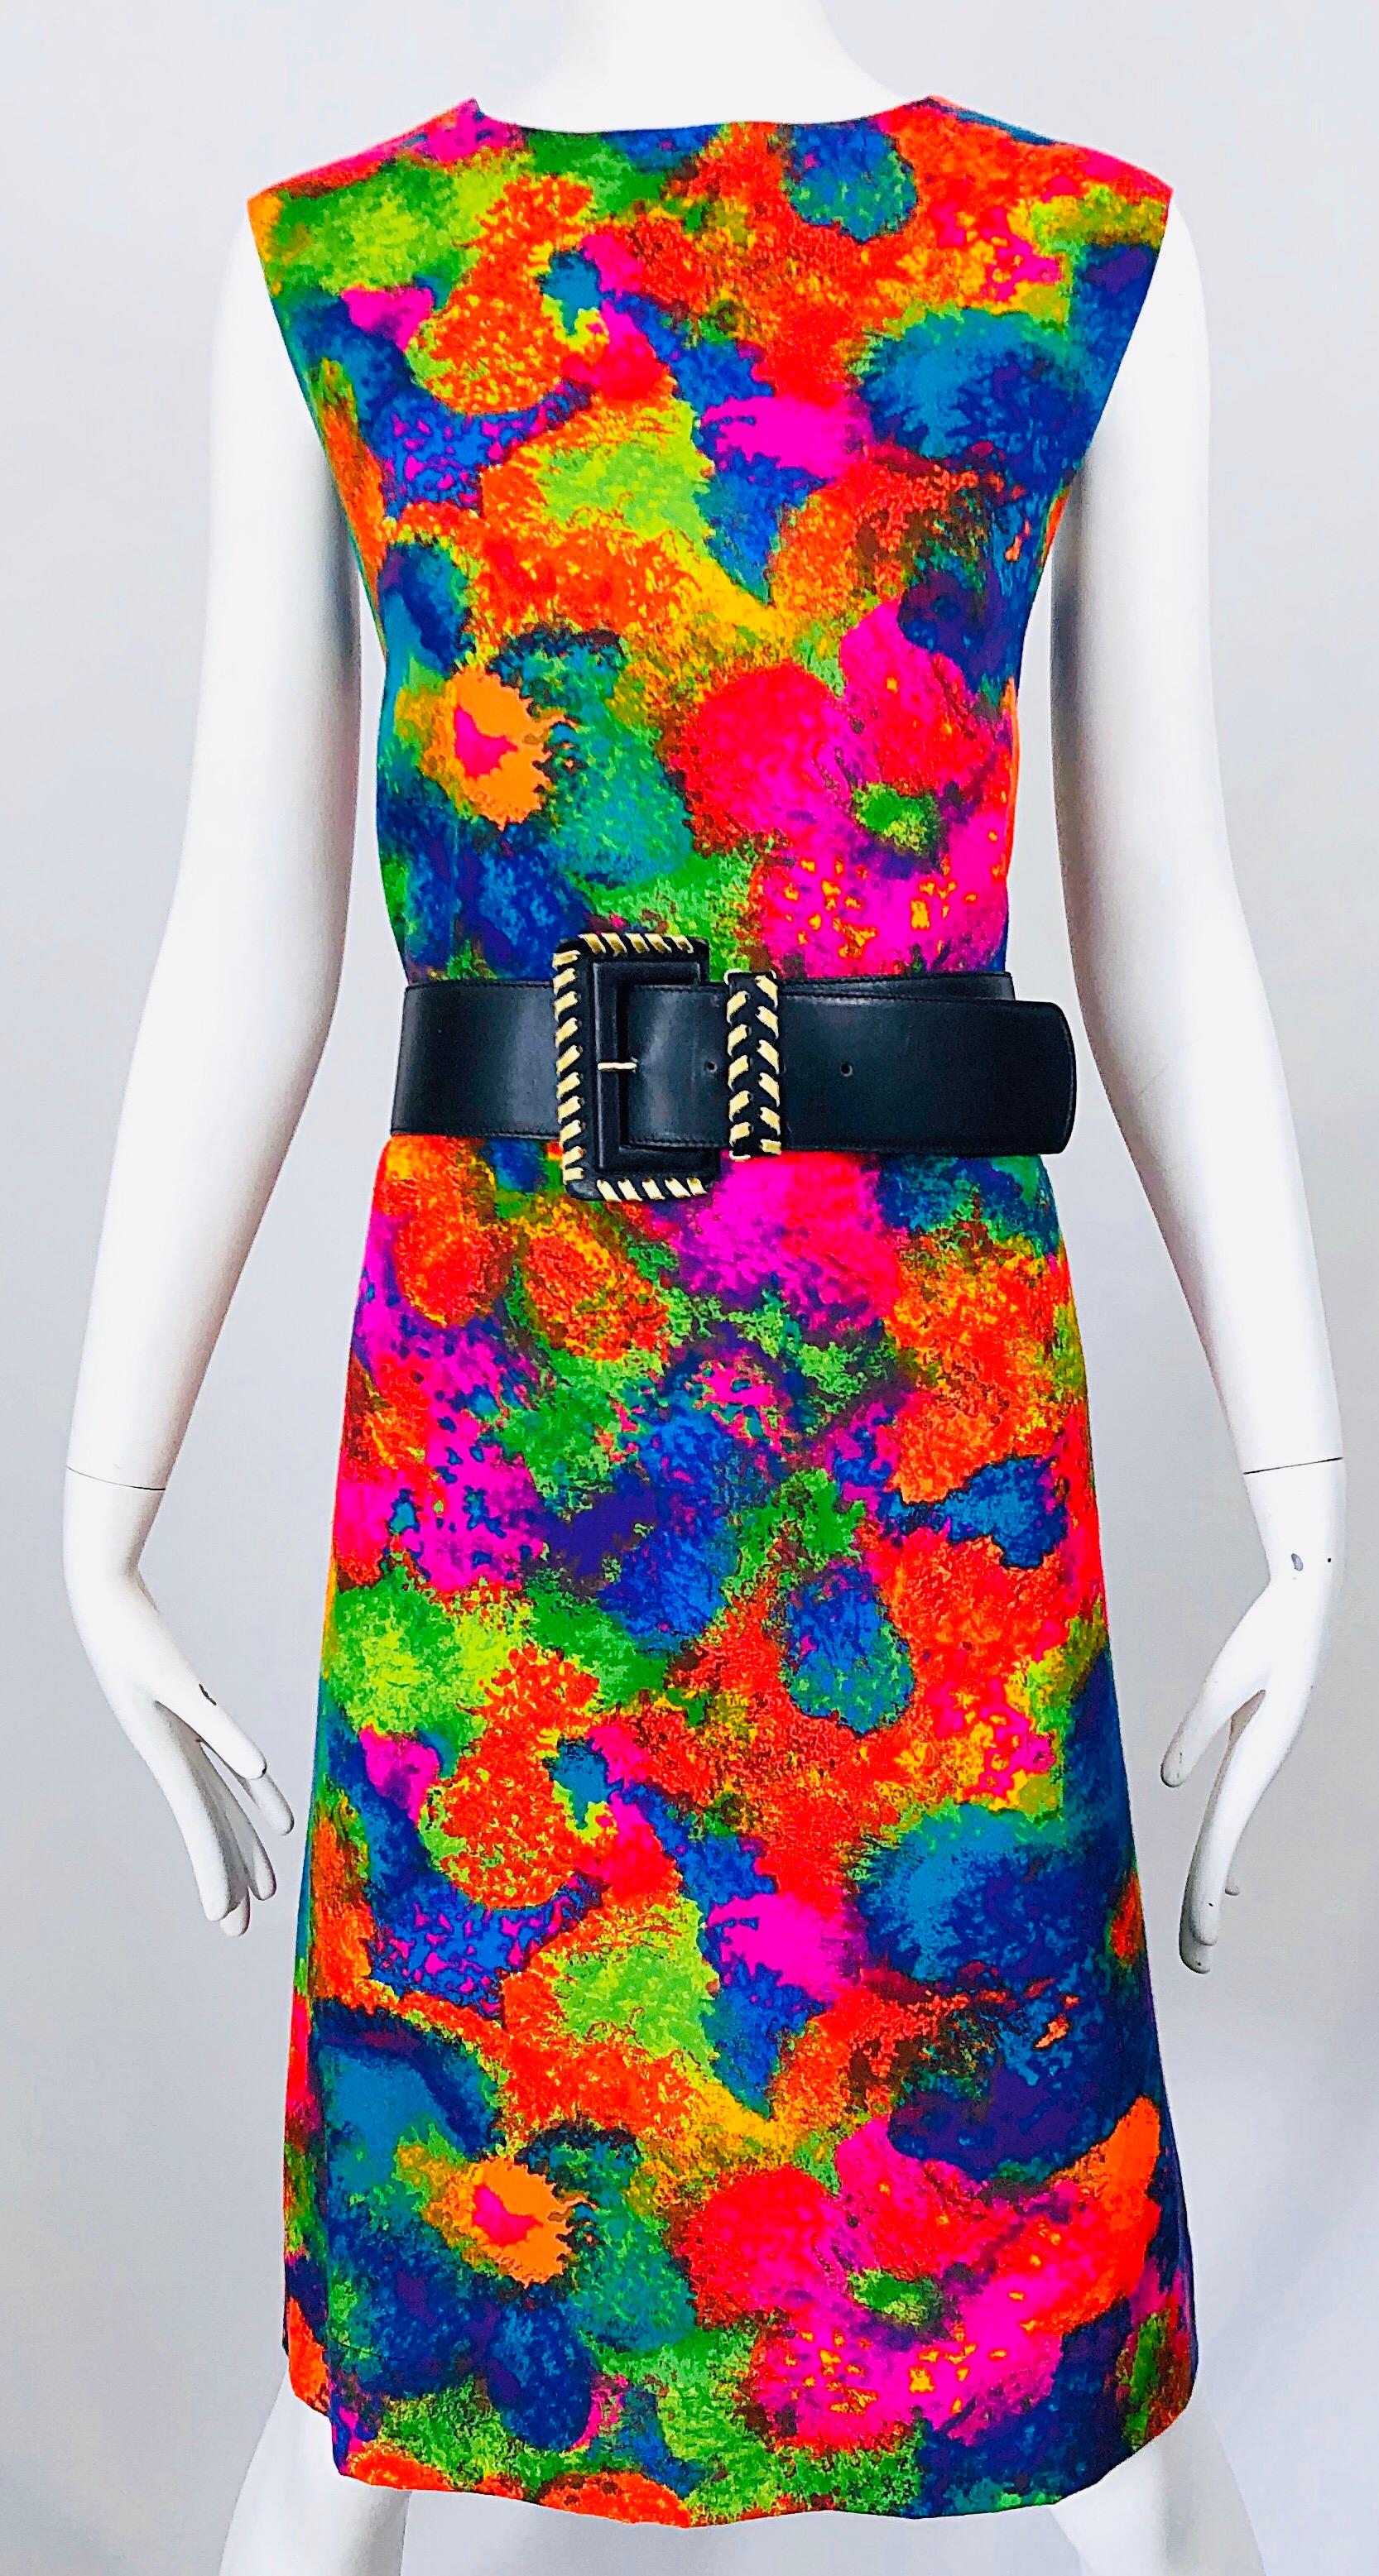 Chic 1960s Larger Size Neon Abstract Flower Print Vintage 60s Cotton Shift Dress For Sale 3